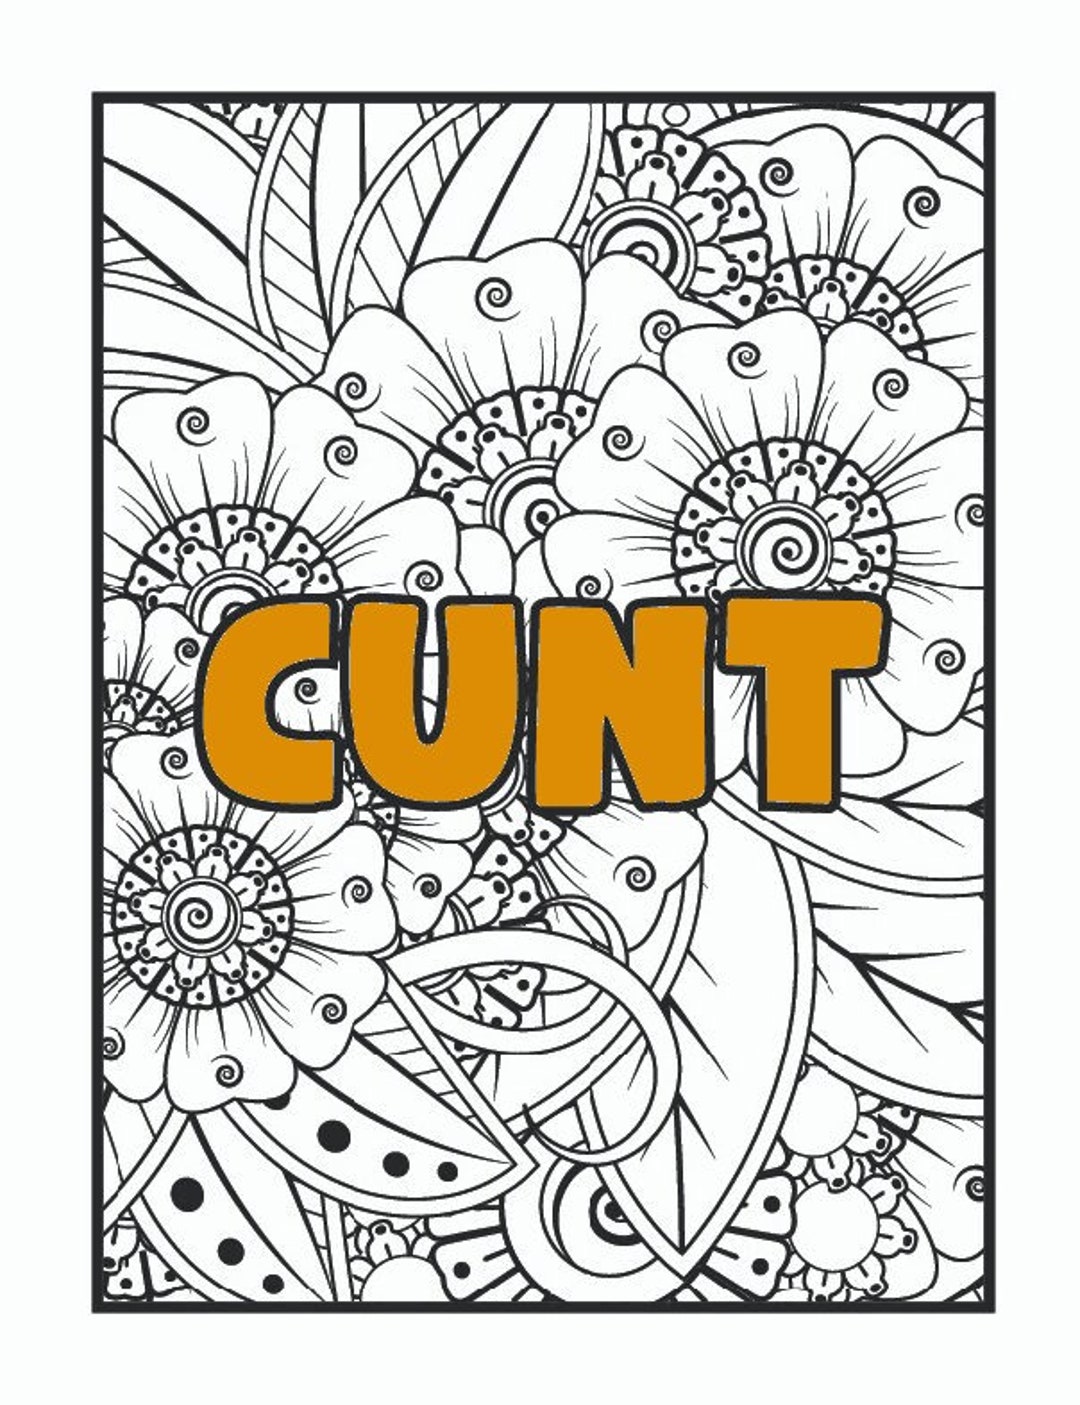 Swear Word Coloring Books for Adults Ser.: Sloth Coloring Book : Swear Word  Black Night Edition: an Adult Coloing Book of 40 Sweary Adult Coloring  Pages with Rude, Funny Sloths by Adult